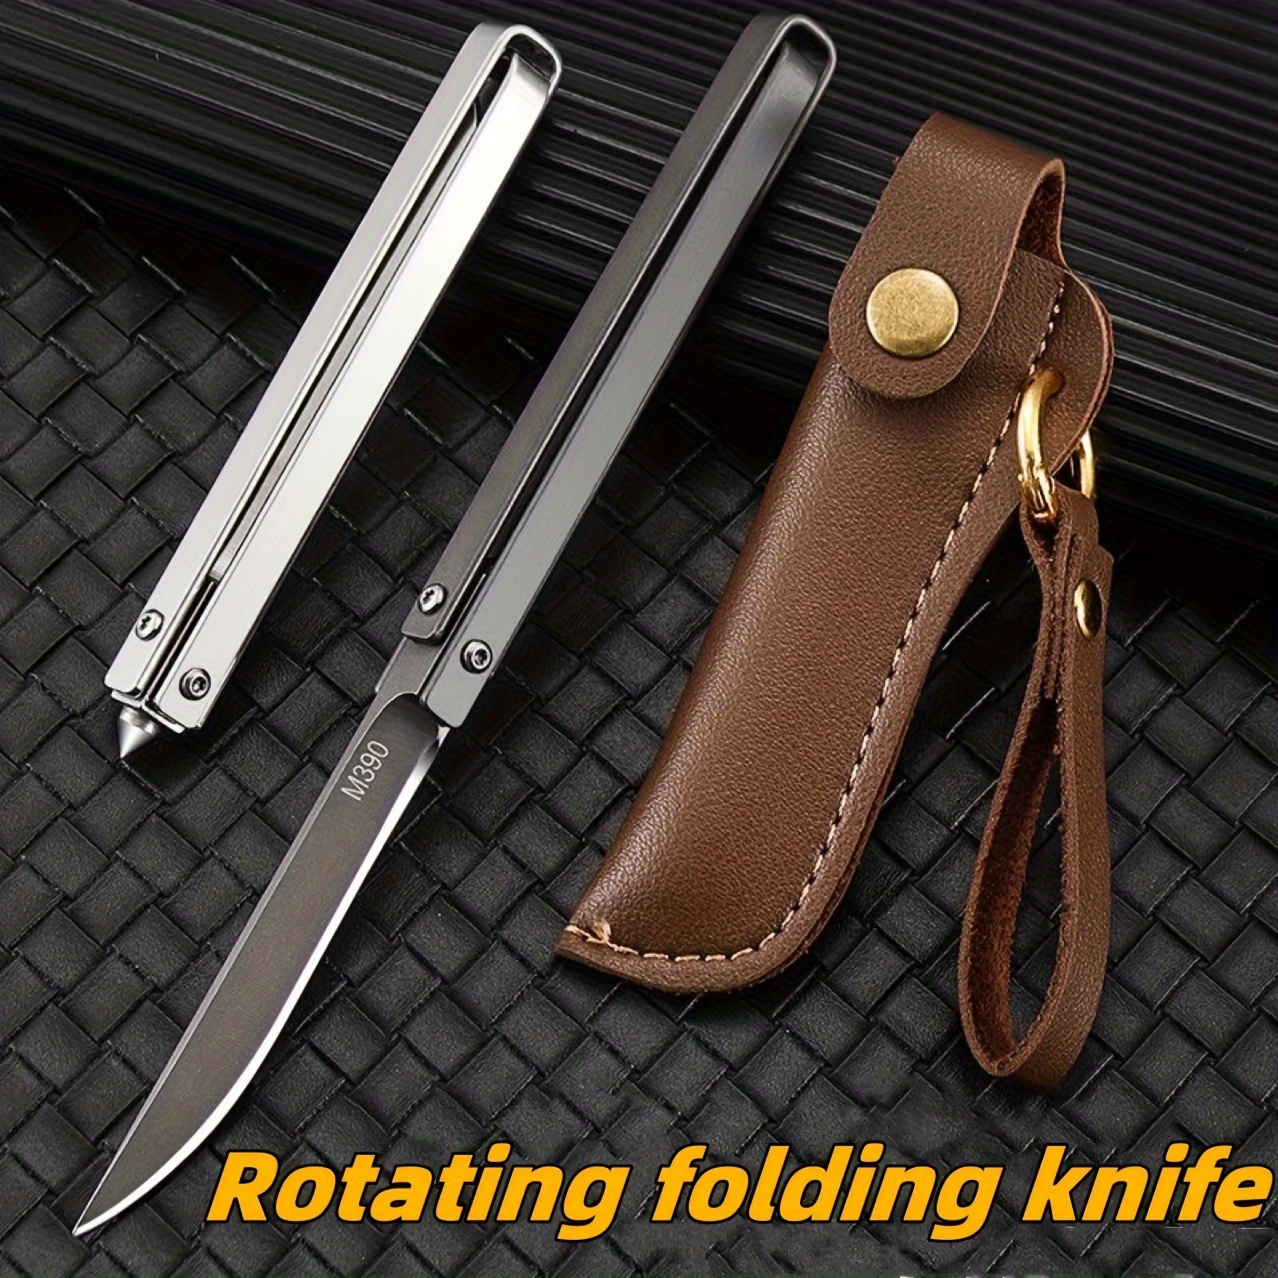 

The Rotating Folding Knife With Leather Cover Is Made Of Stainless Steel Material, Suitable For Outdoor Camping, Mountaineering, Fishing And Other Activities, And Is Also A Very Special Gift